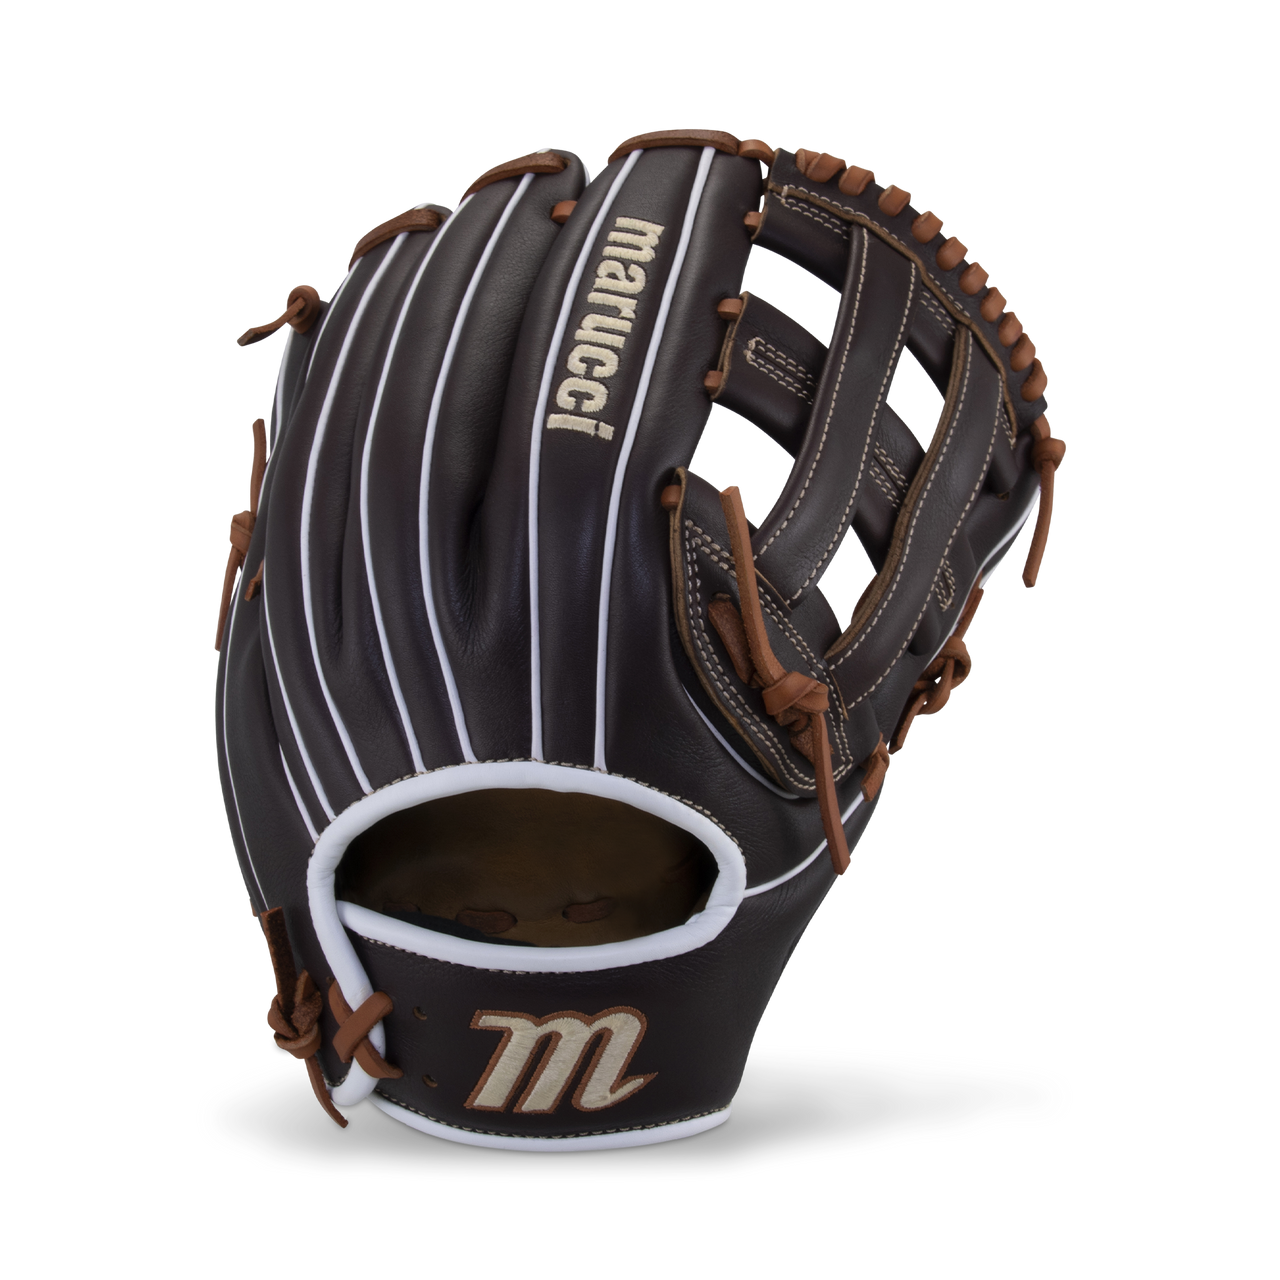 marucci-krewe-m-type-baseball-glove-45a3-12-inch-h-web-right-hand-throw MFGKR45A3-BRTN-RightHandThrow Marucci  <h1 class=productView-title-lower>Marucci KREWE M TYPE 45A3 12 H-WEB Baseball Glove</h1> <p><em>The